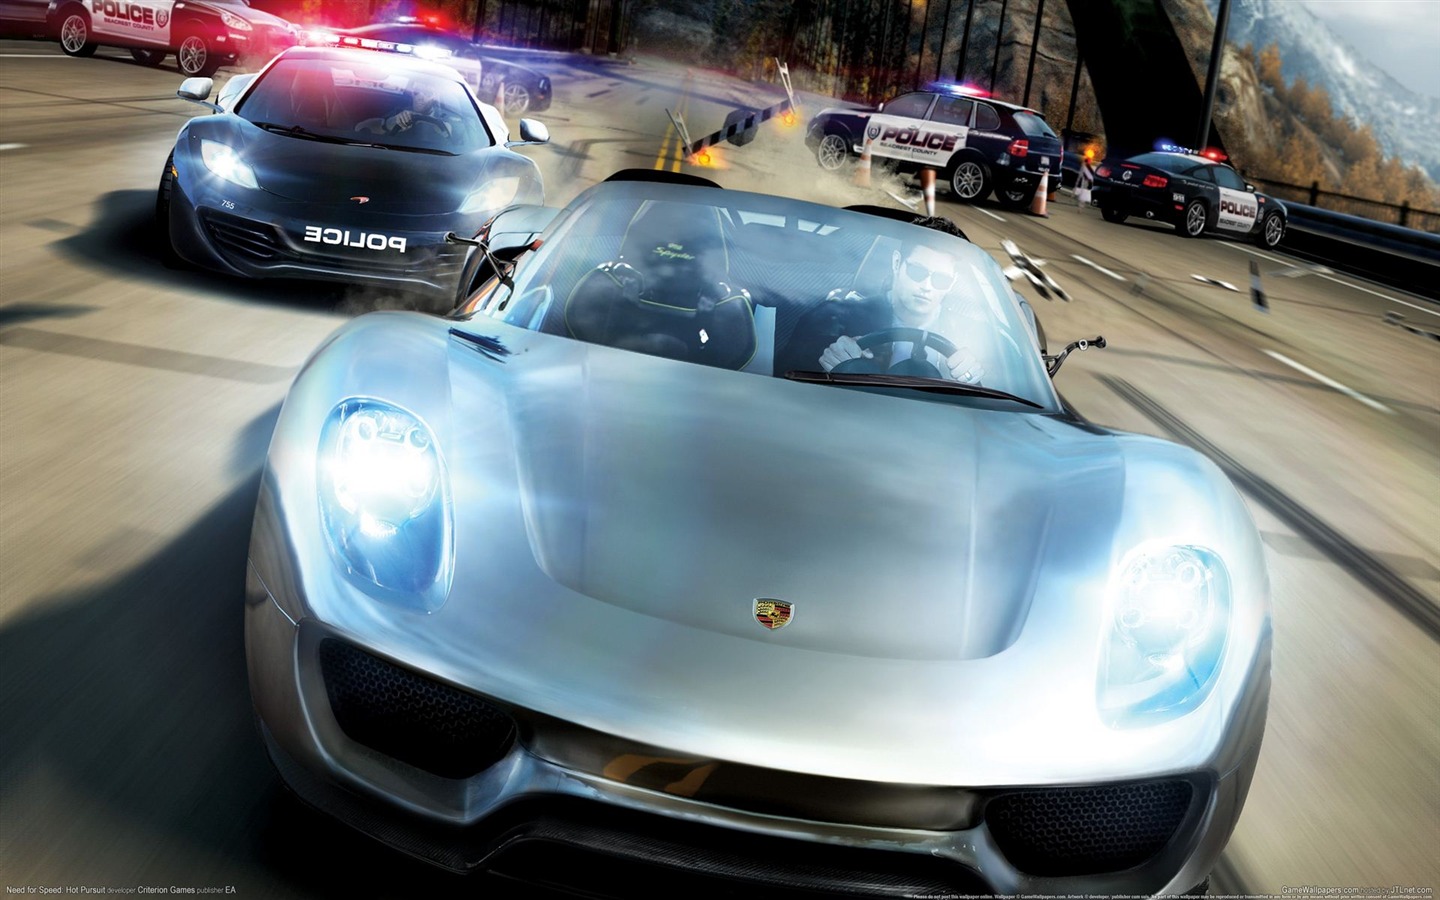 Need for Speed: Hot Pursuit 極品飛車14：熱力追踪 #4 - 1440x900